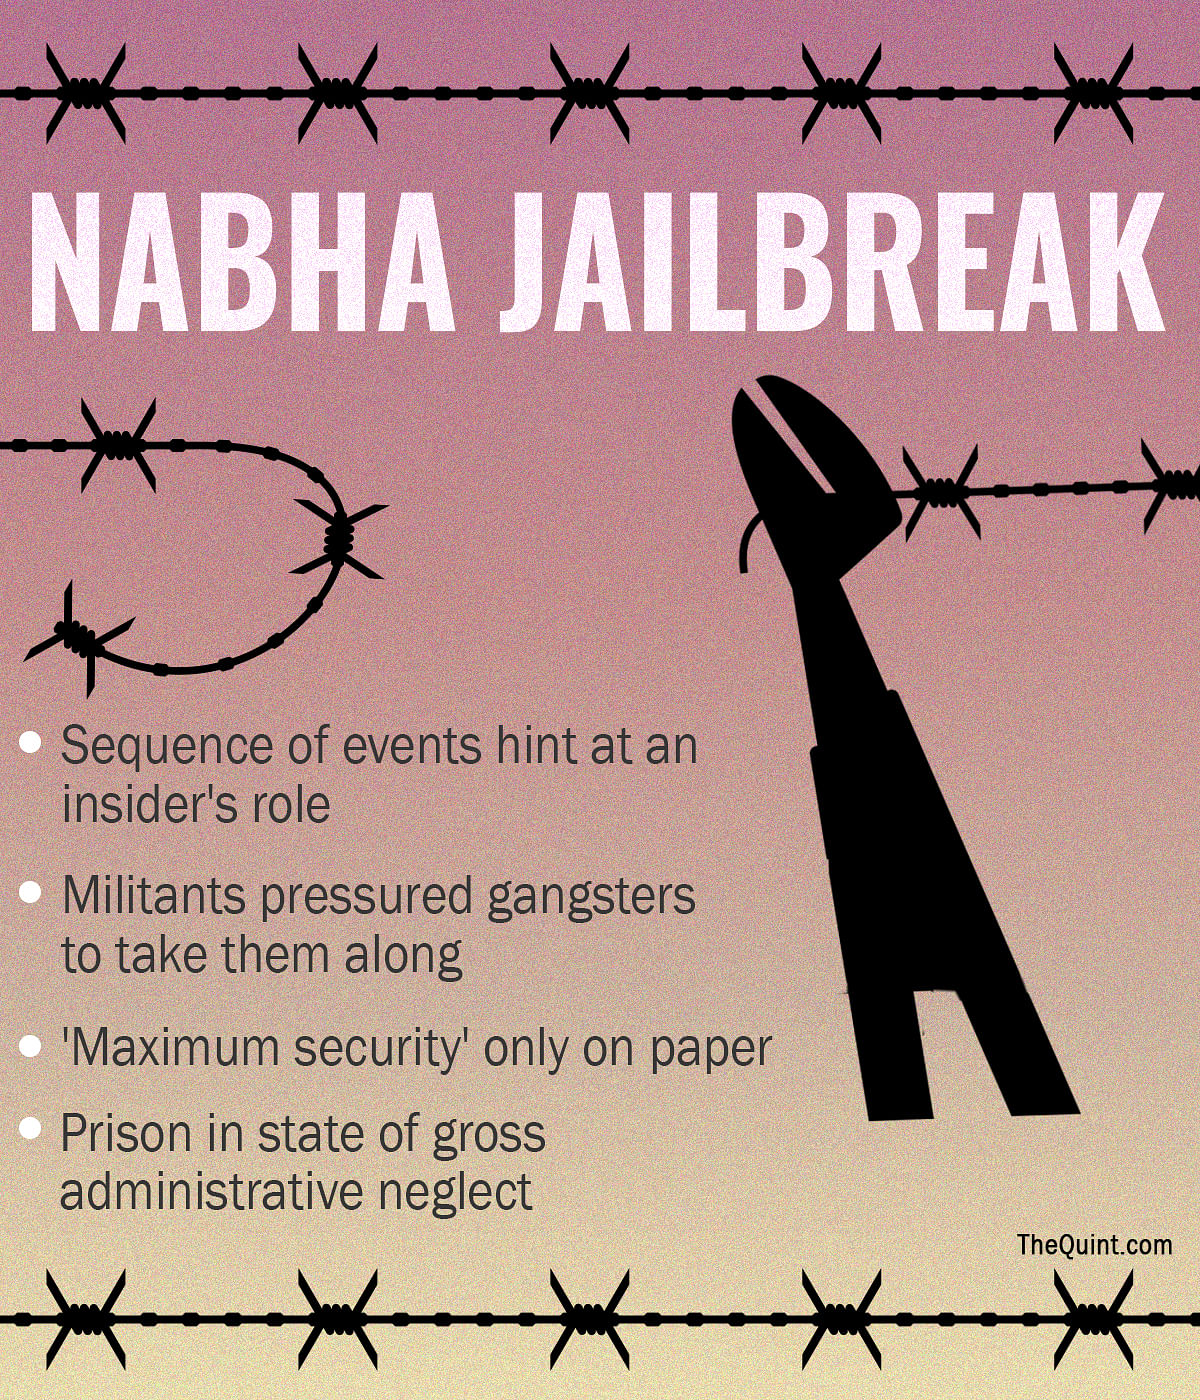 The Nabha jailbreak is a symptom of a  deeper malaise that afflicts Punjab’s prison system,  writes Shashi Kant.